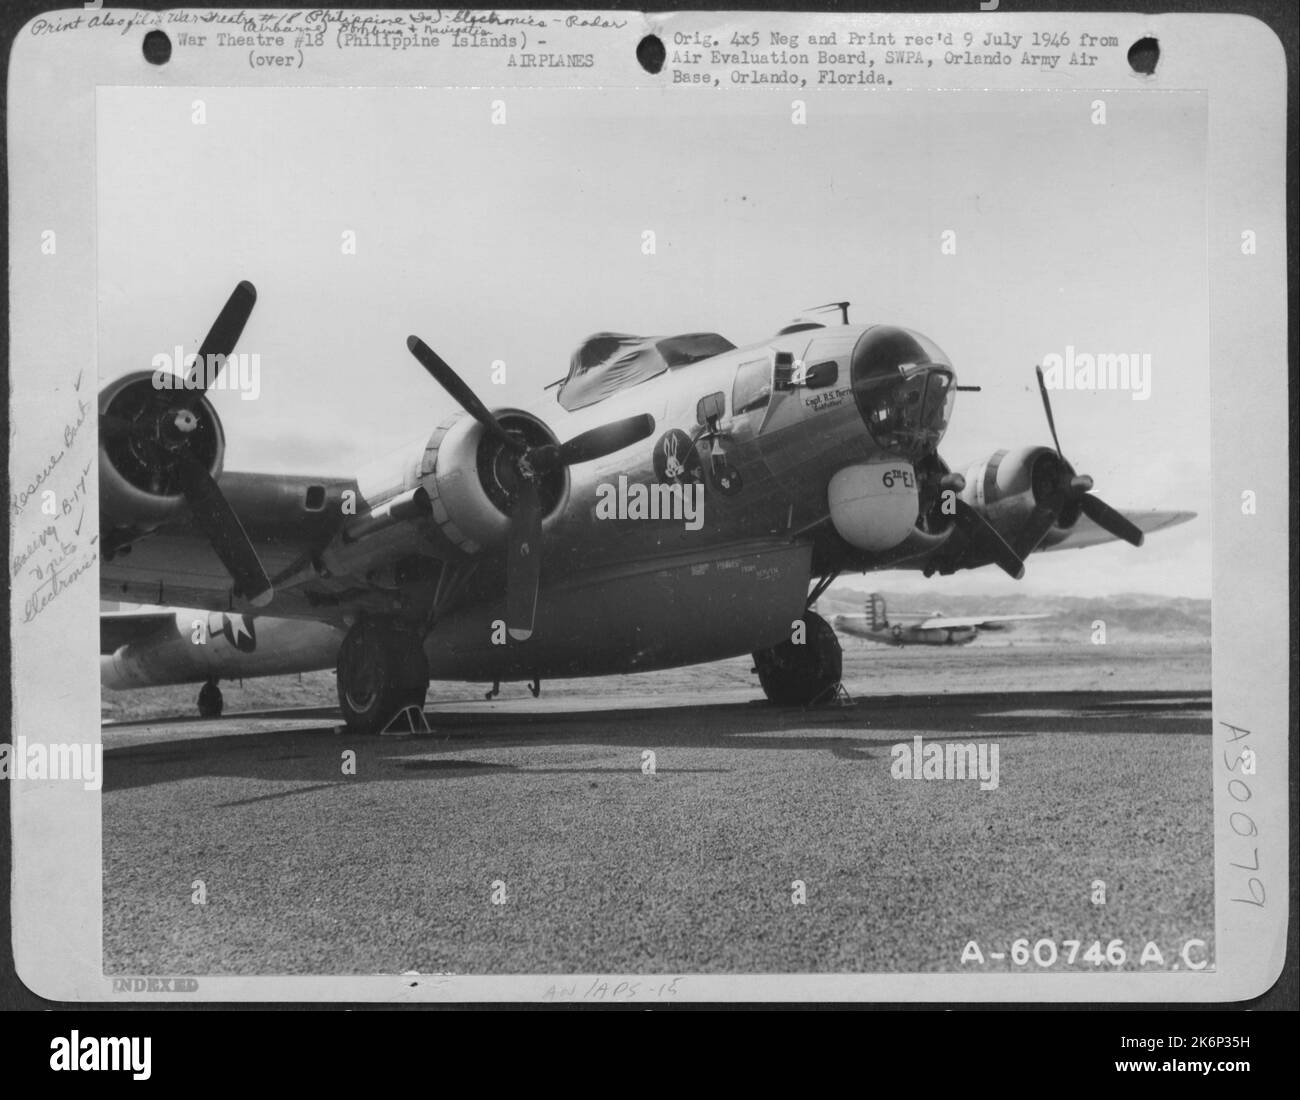 Boeing B-17 "Flying Fortress" Of The 6Th Emergency Reserve Squadron